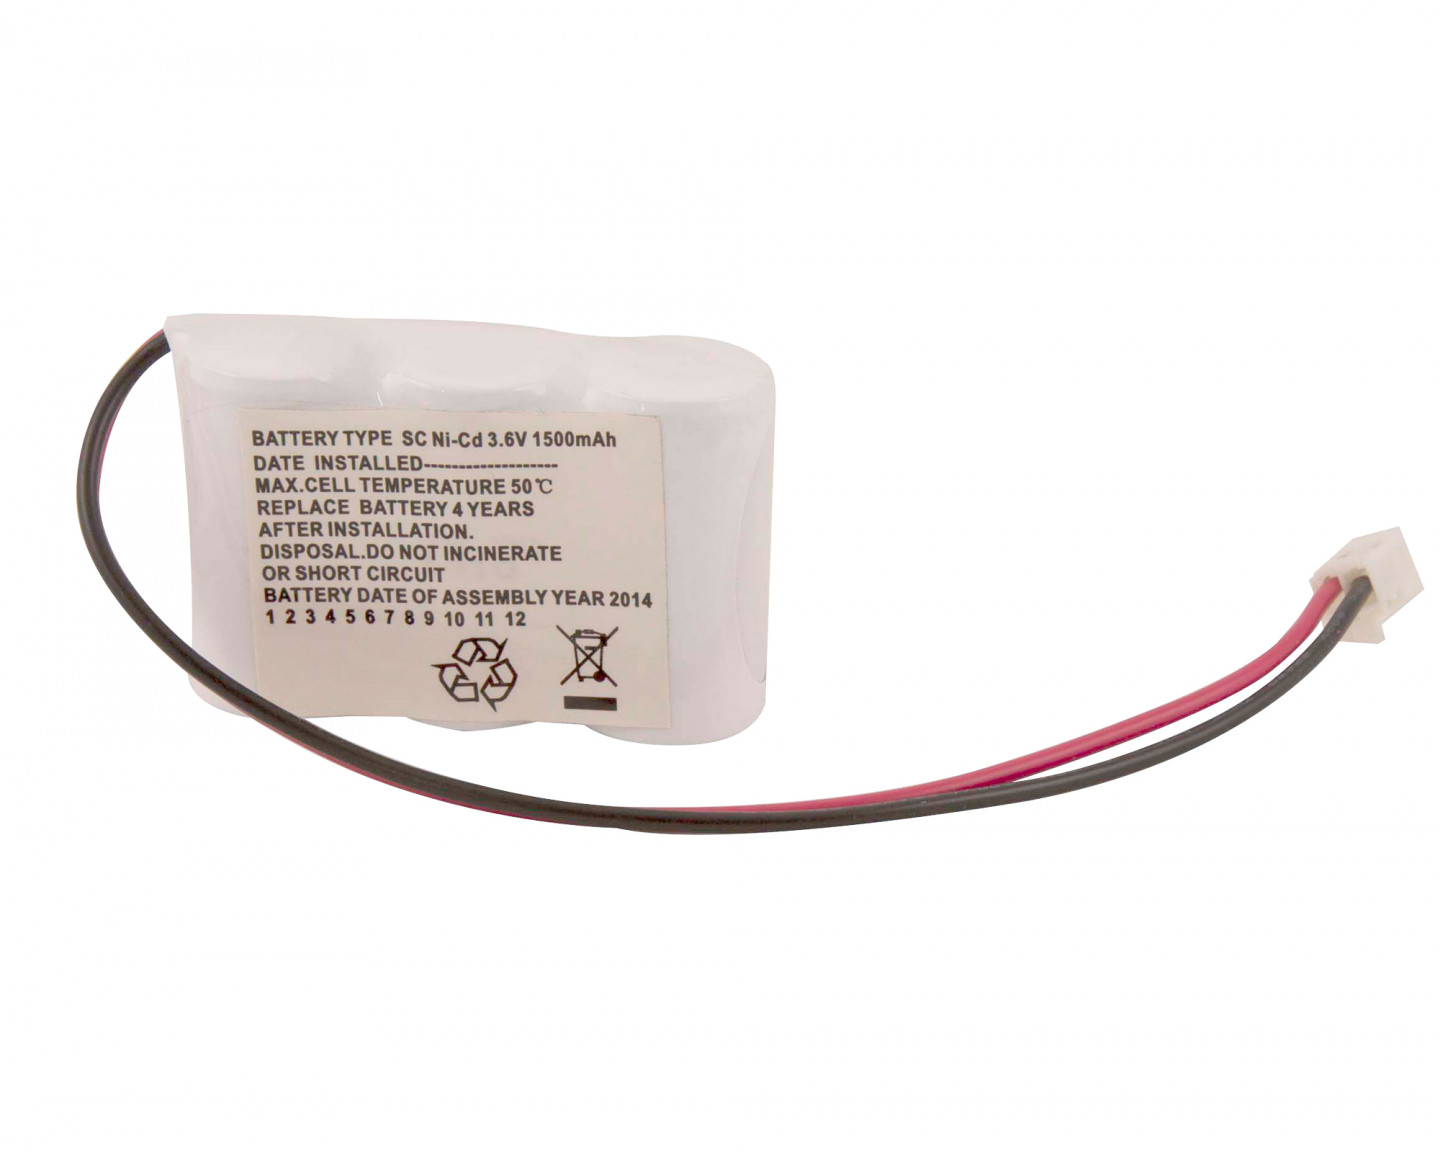 OVEMB3615NCP - Replacement battery